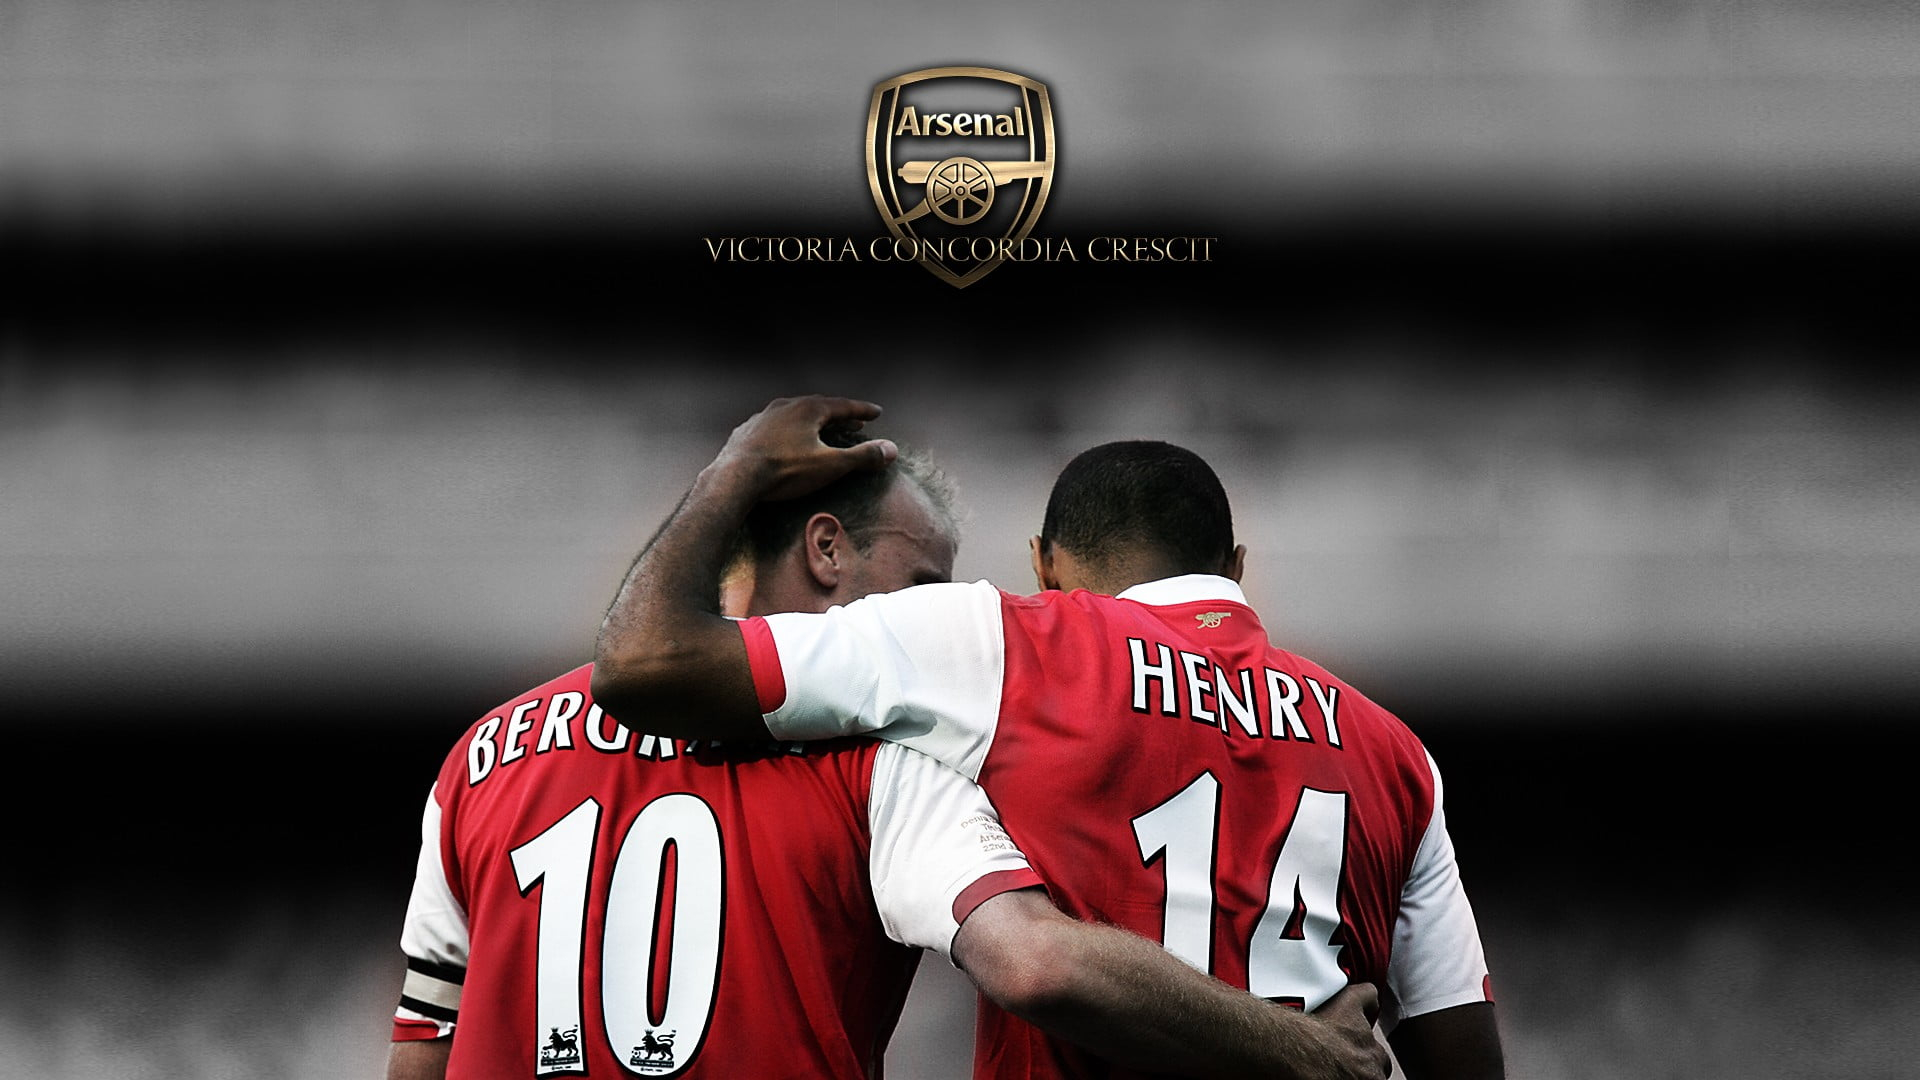 Arsenal Fc wallpaper, London, Thierry Henry, men's red and white crew-neck shirt